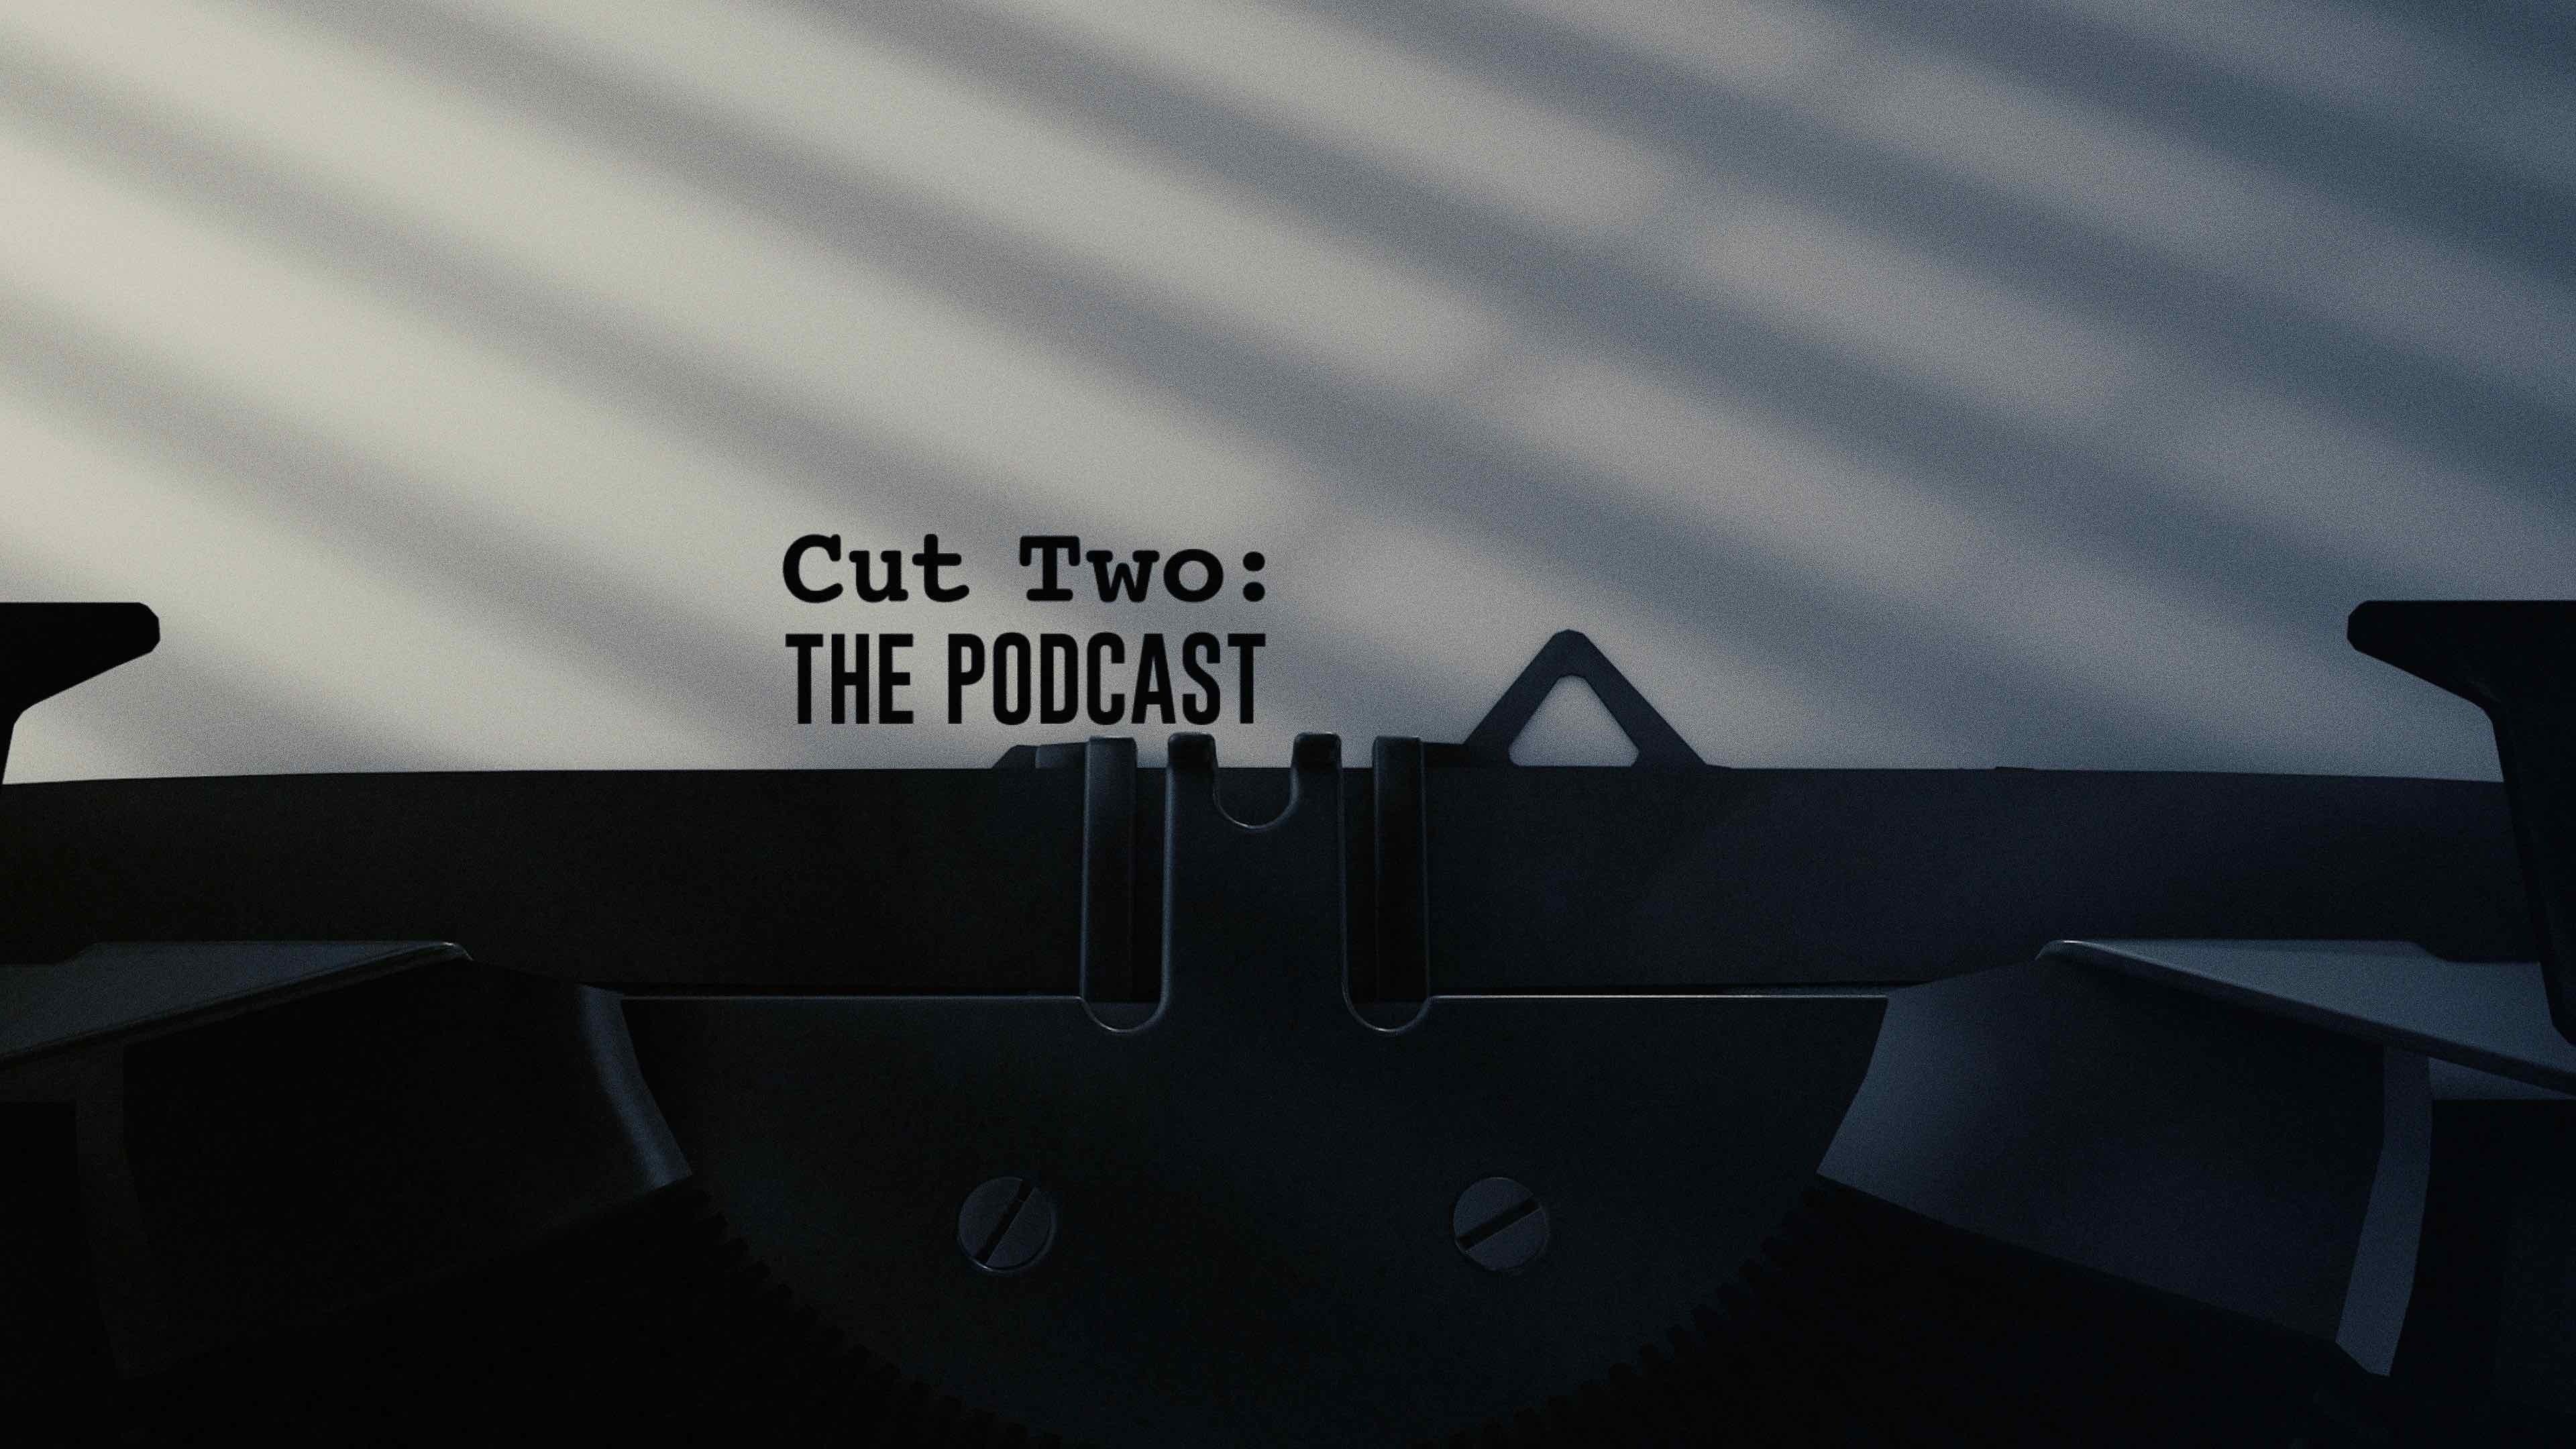 Cut Two: THE PODCAST